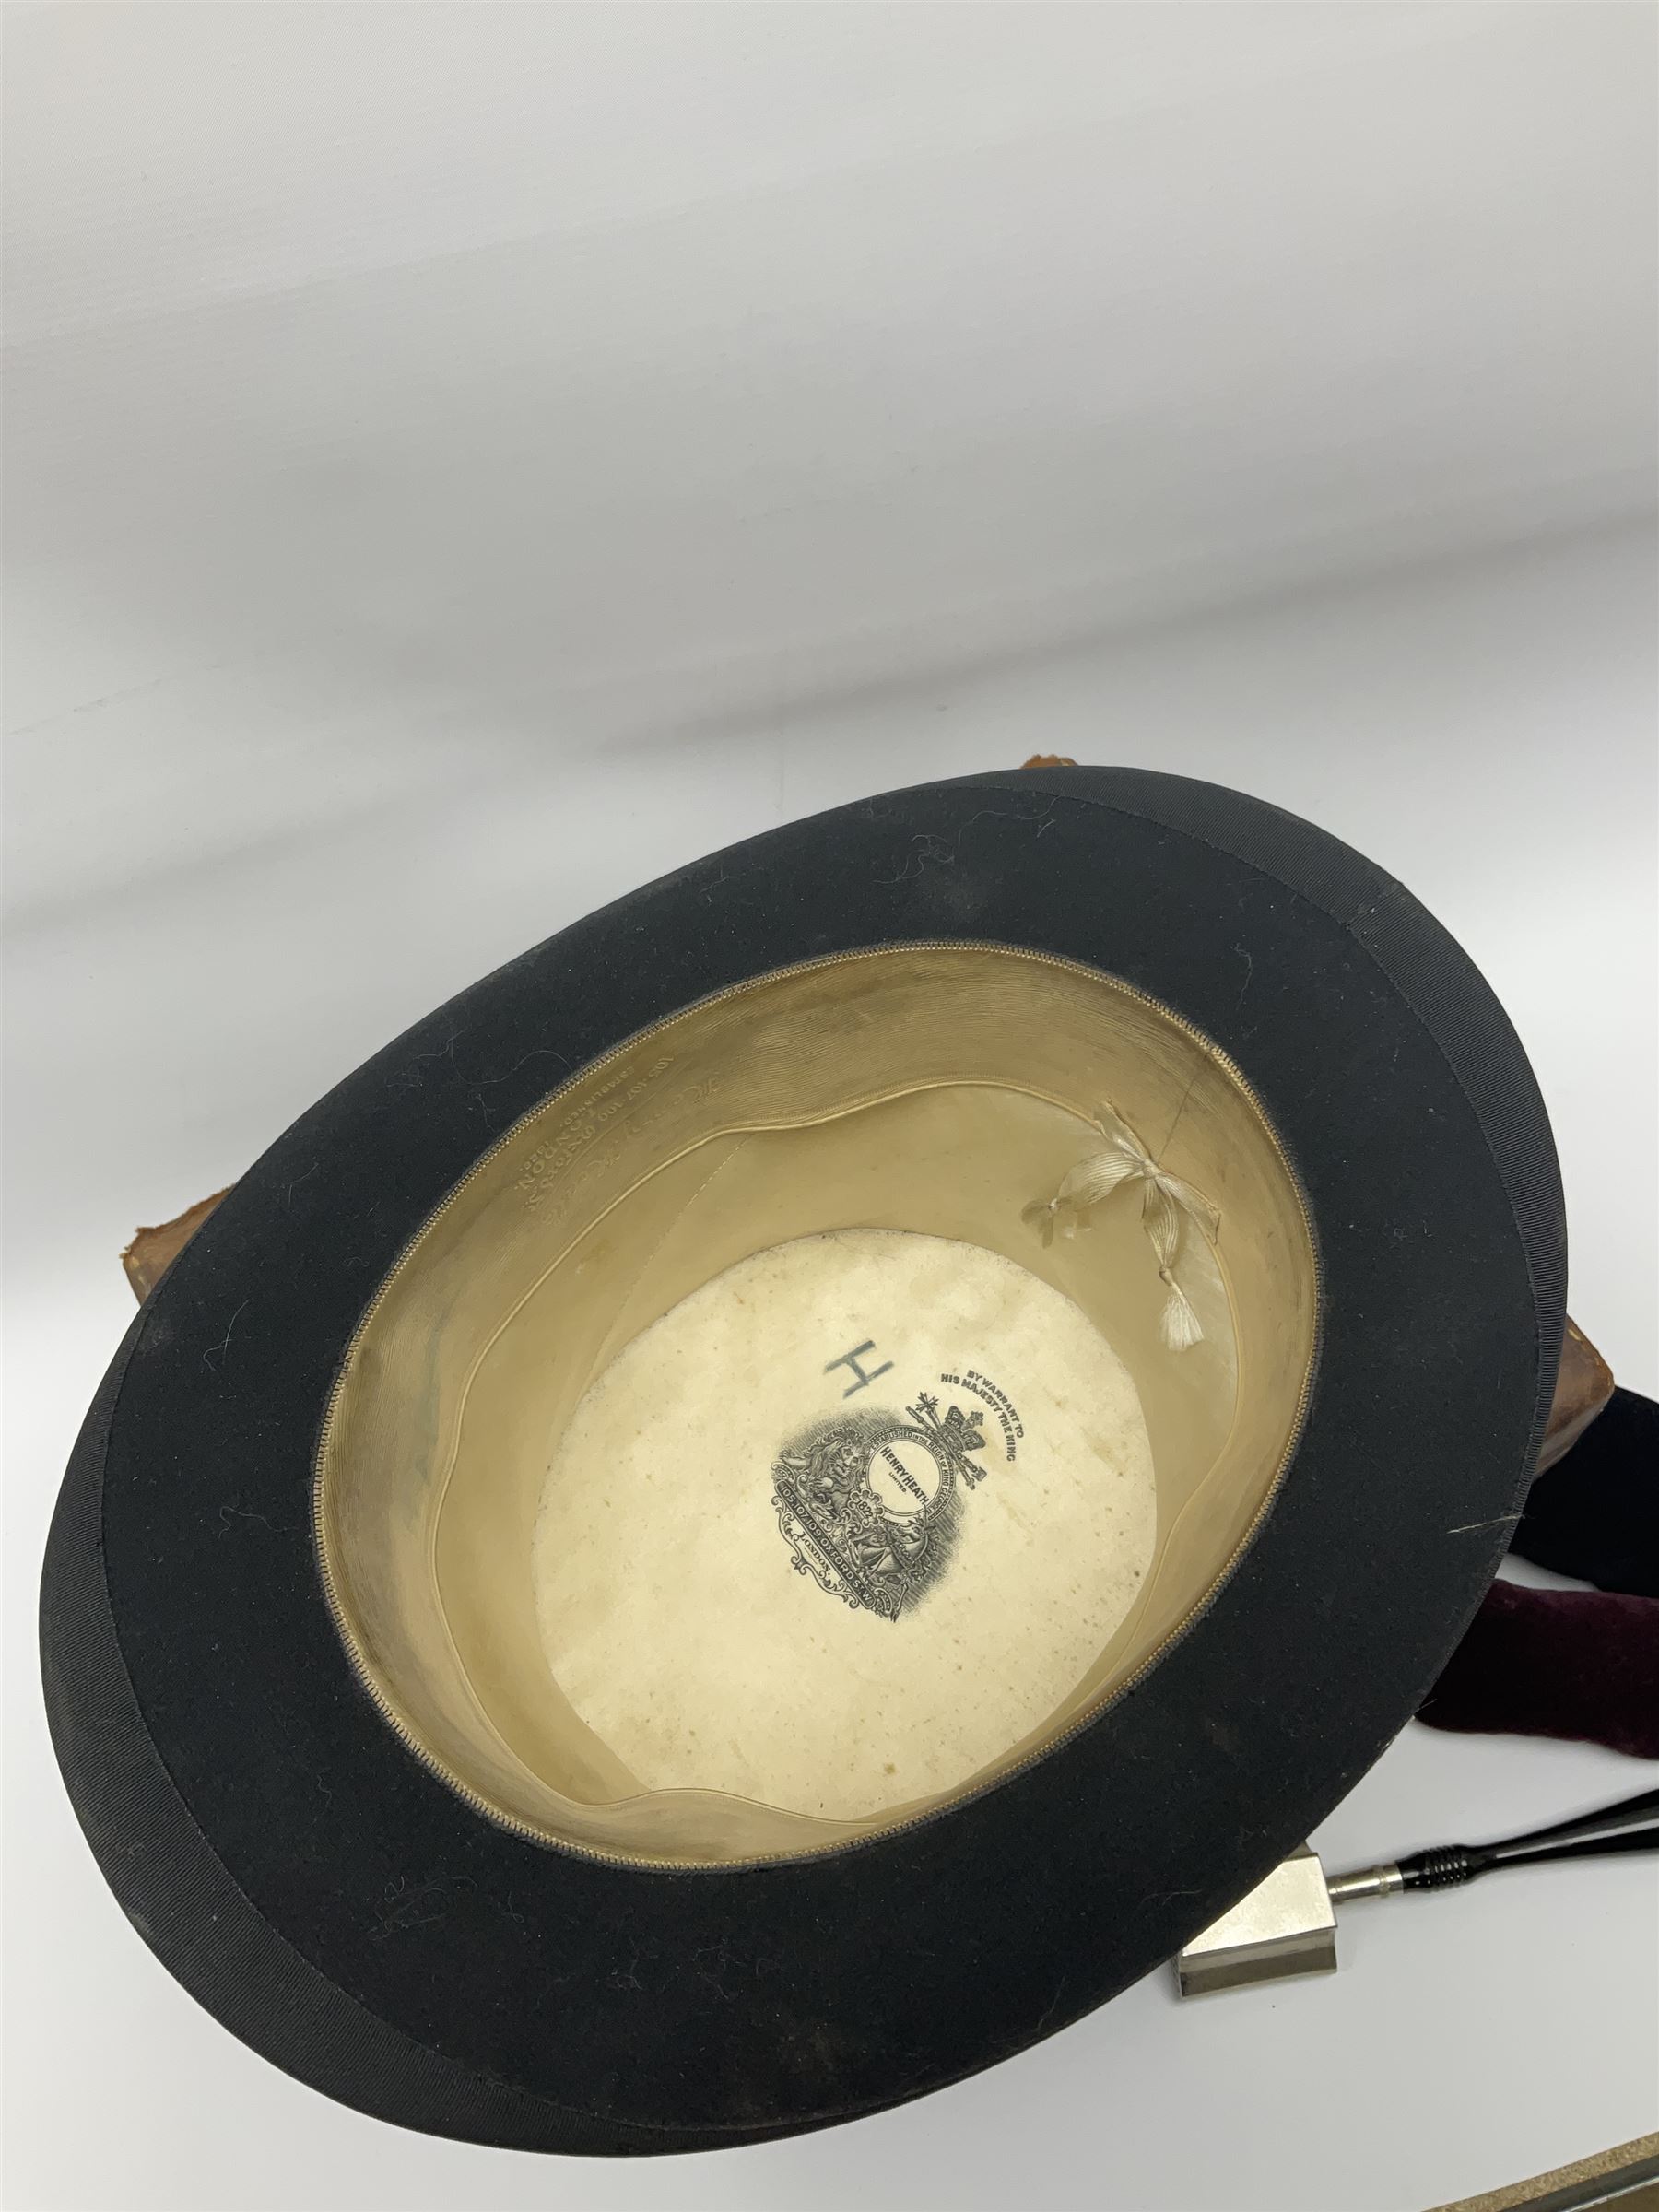 Gentlemen's black brushed silk top hat by Henry Heath of London housed in a leather case with dark r - Image 5 of 9